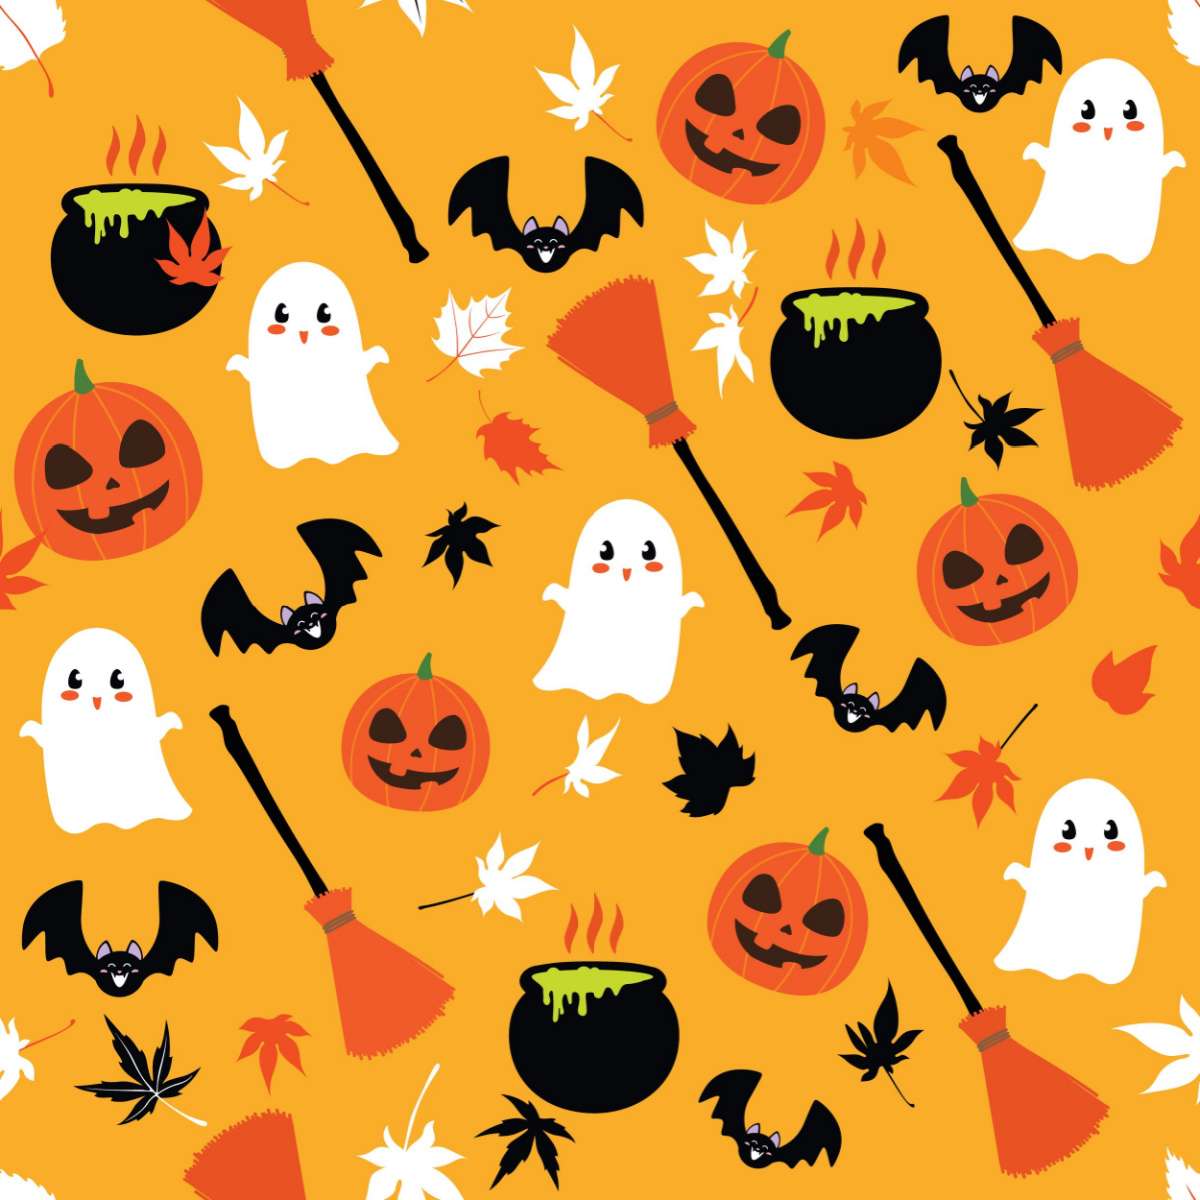 Various symbols of Halloween, including ghosts, bats, and jack o lanterns on an orange background.